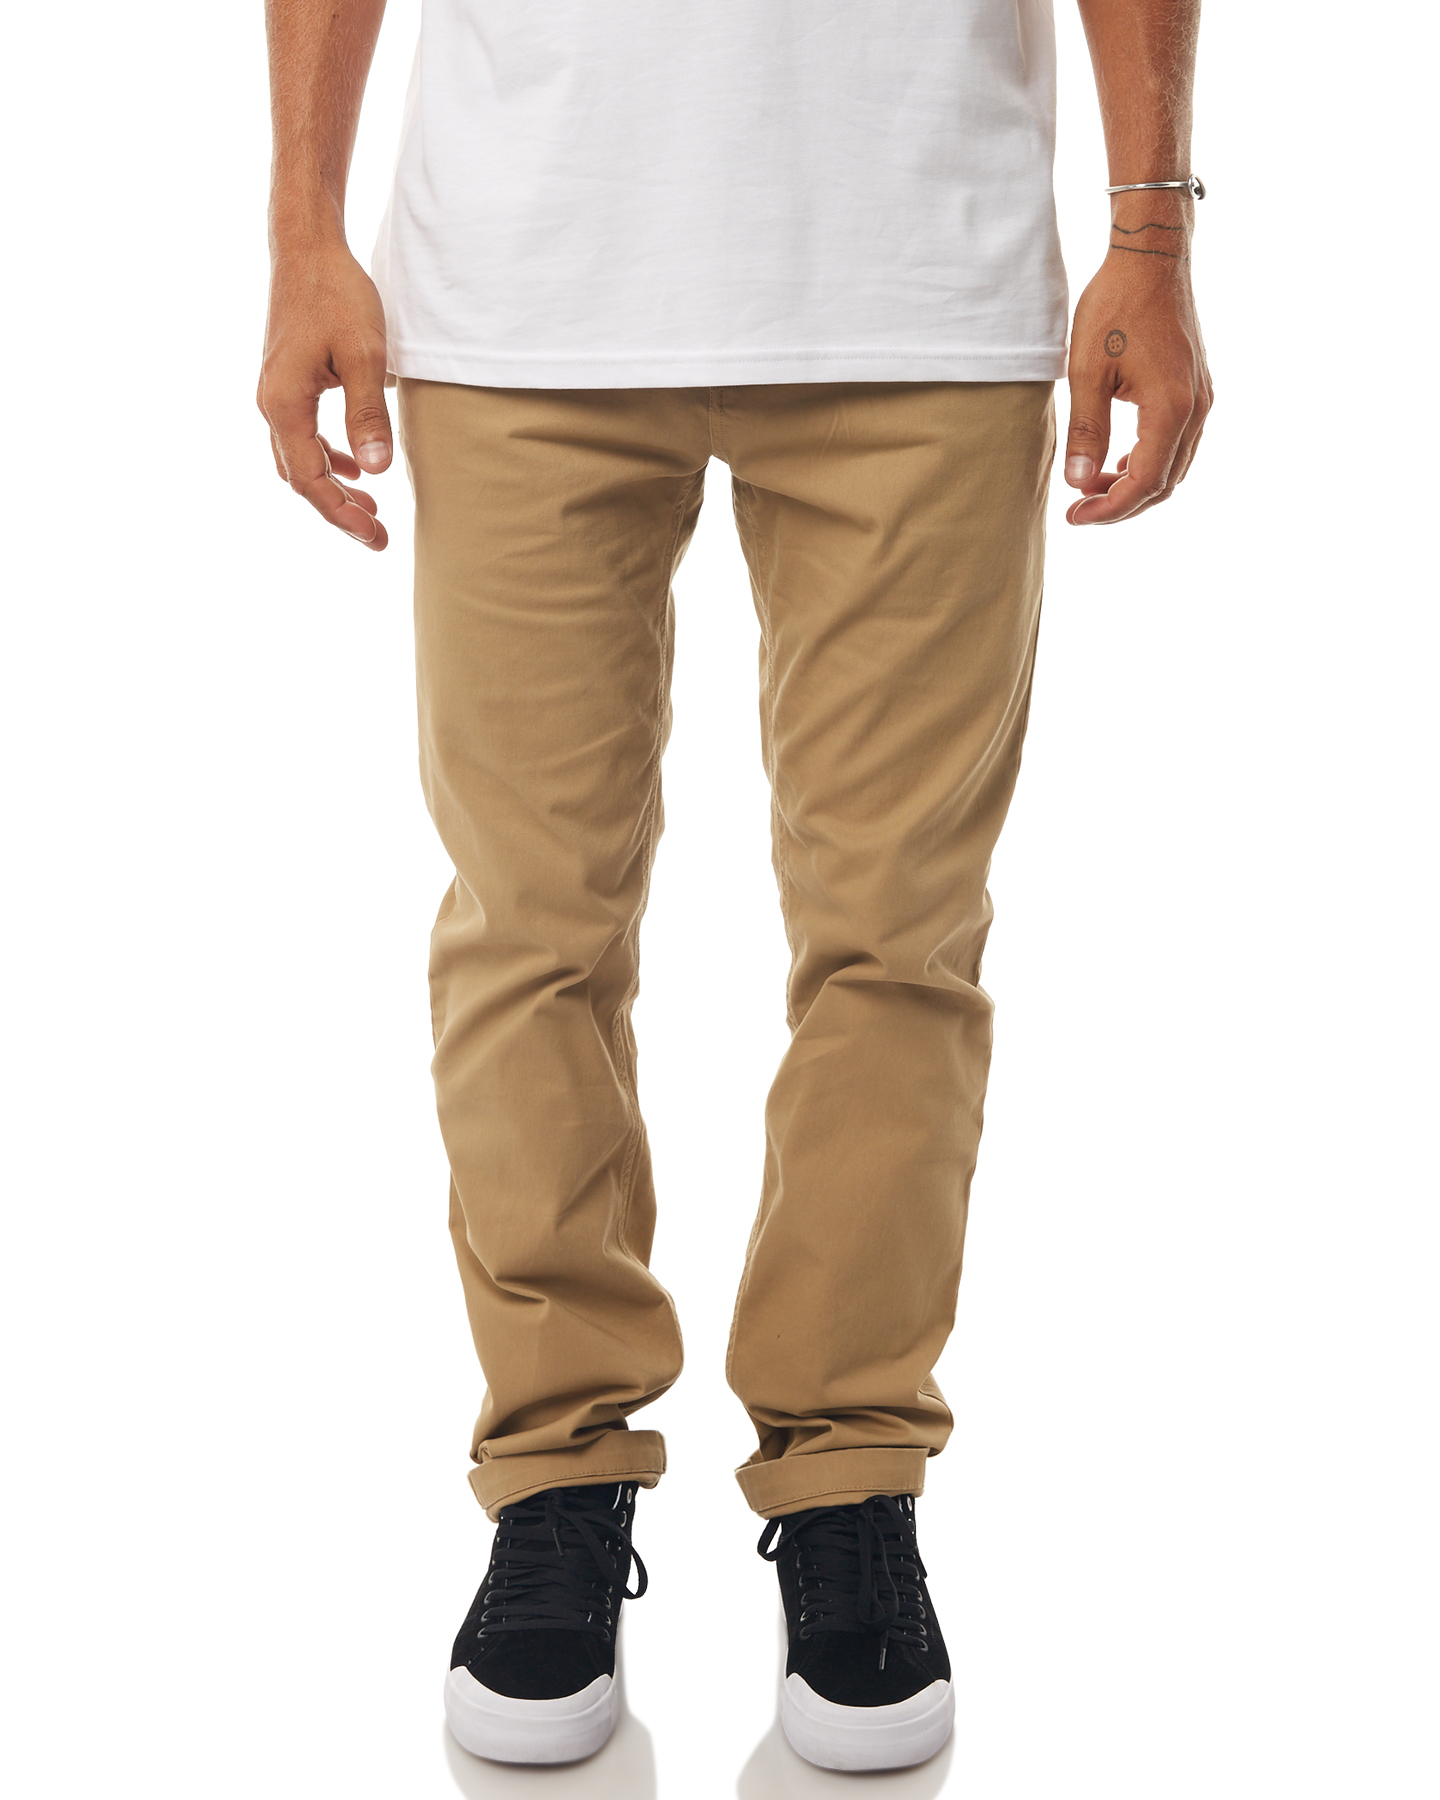 Dc Shoes Mens Worker Straight Chino 32 - Khaki | SurfStitch